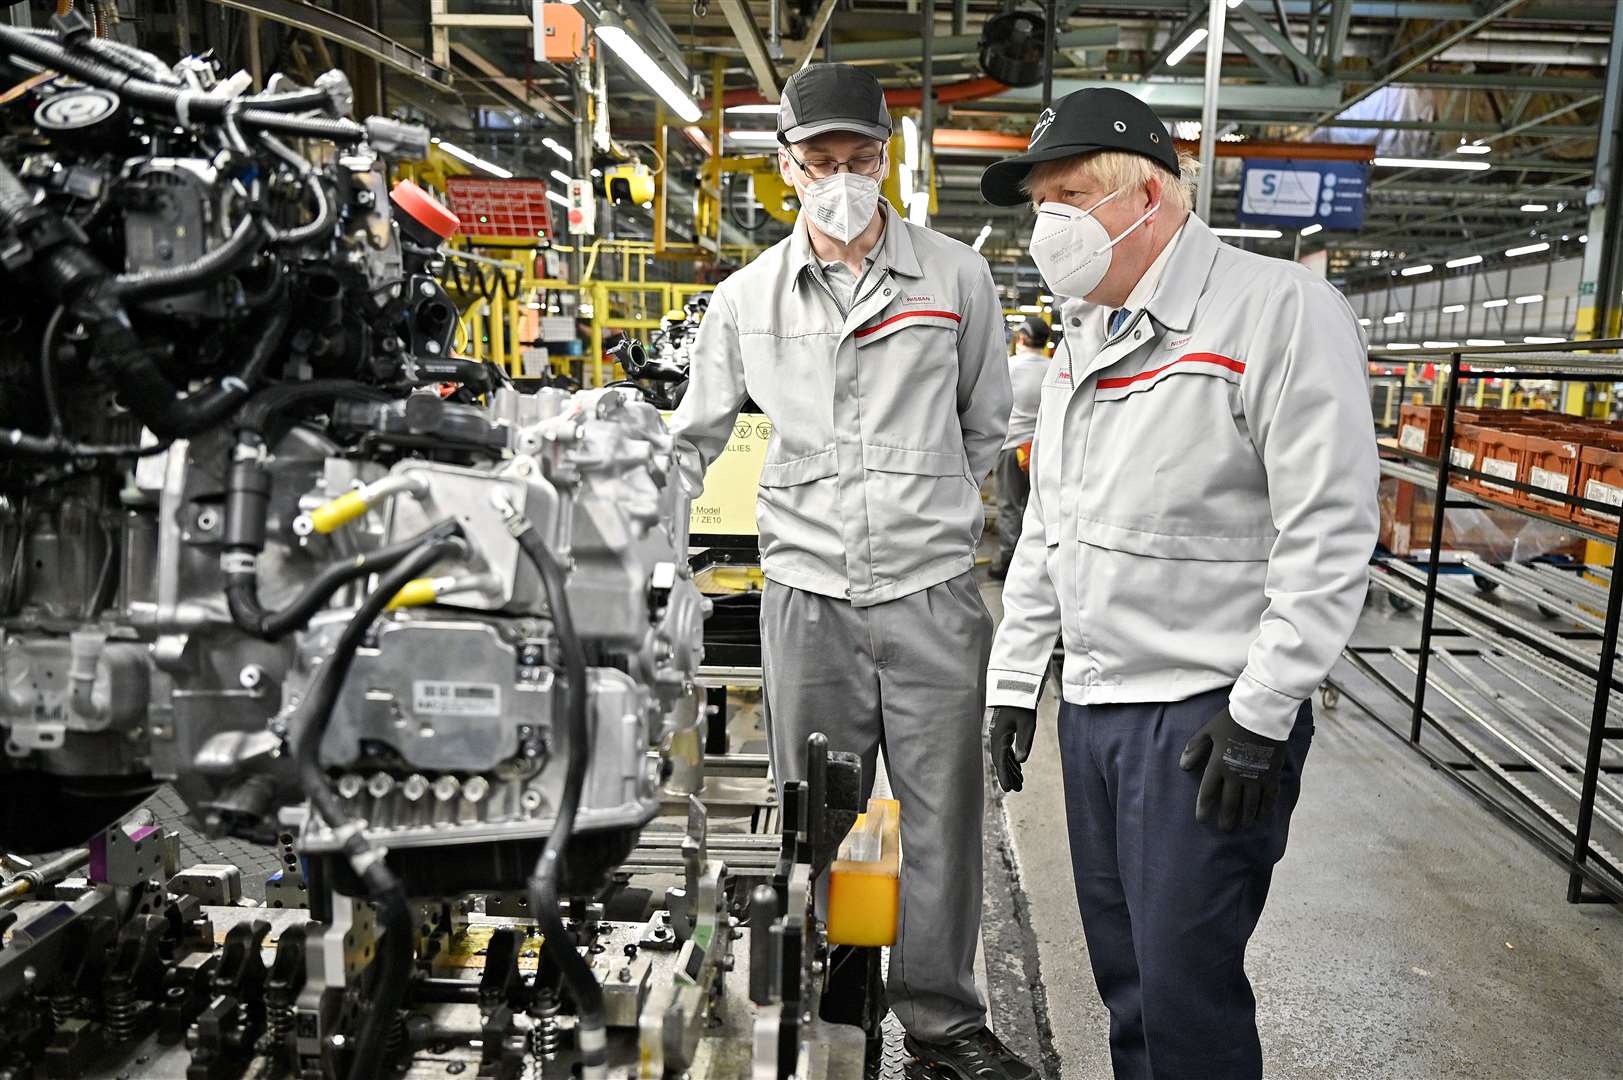 Prime Minister Boris Johnson during his visit to Nissan plant in Sunderland (Jeff J Mitchell/PA)